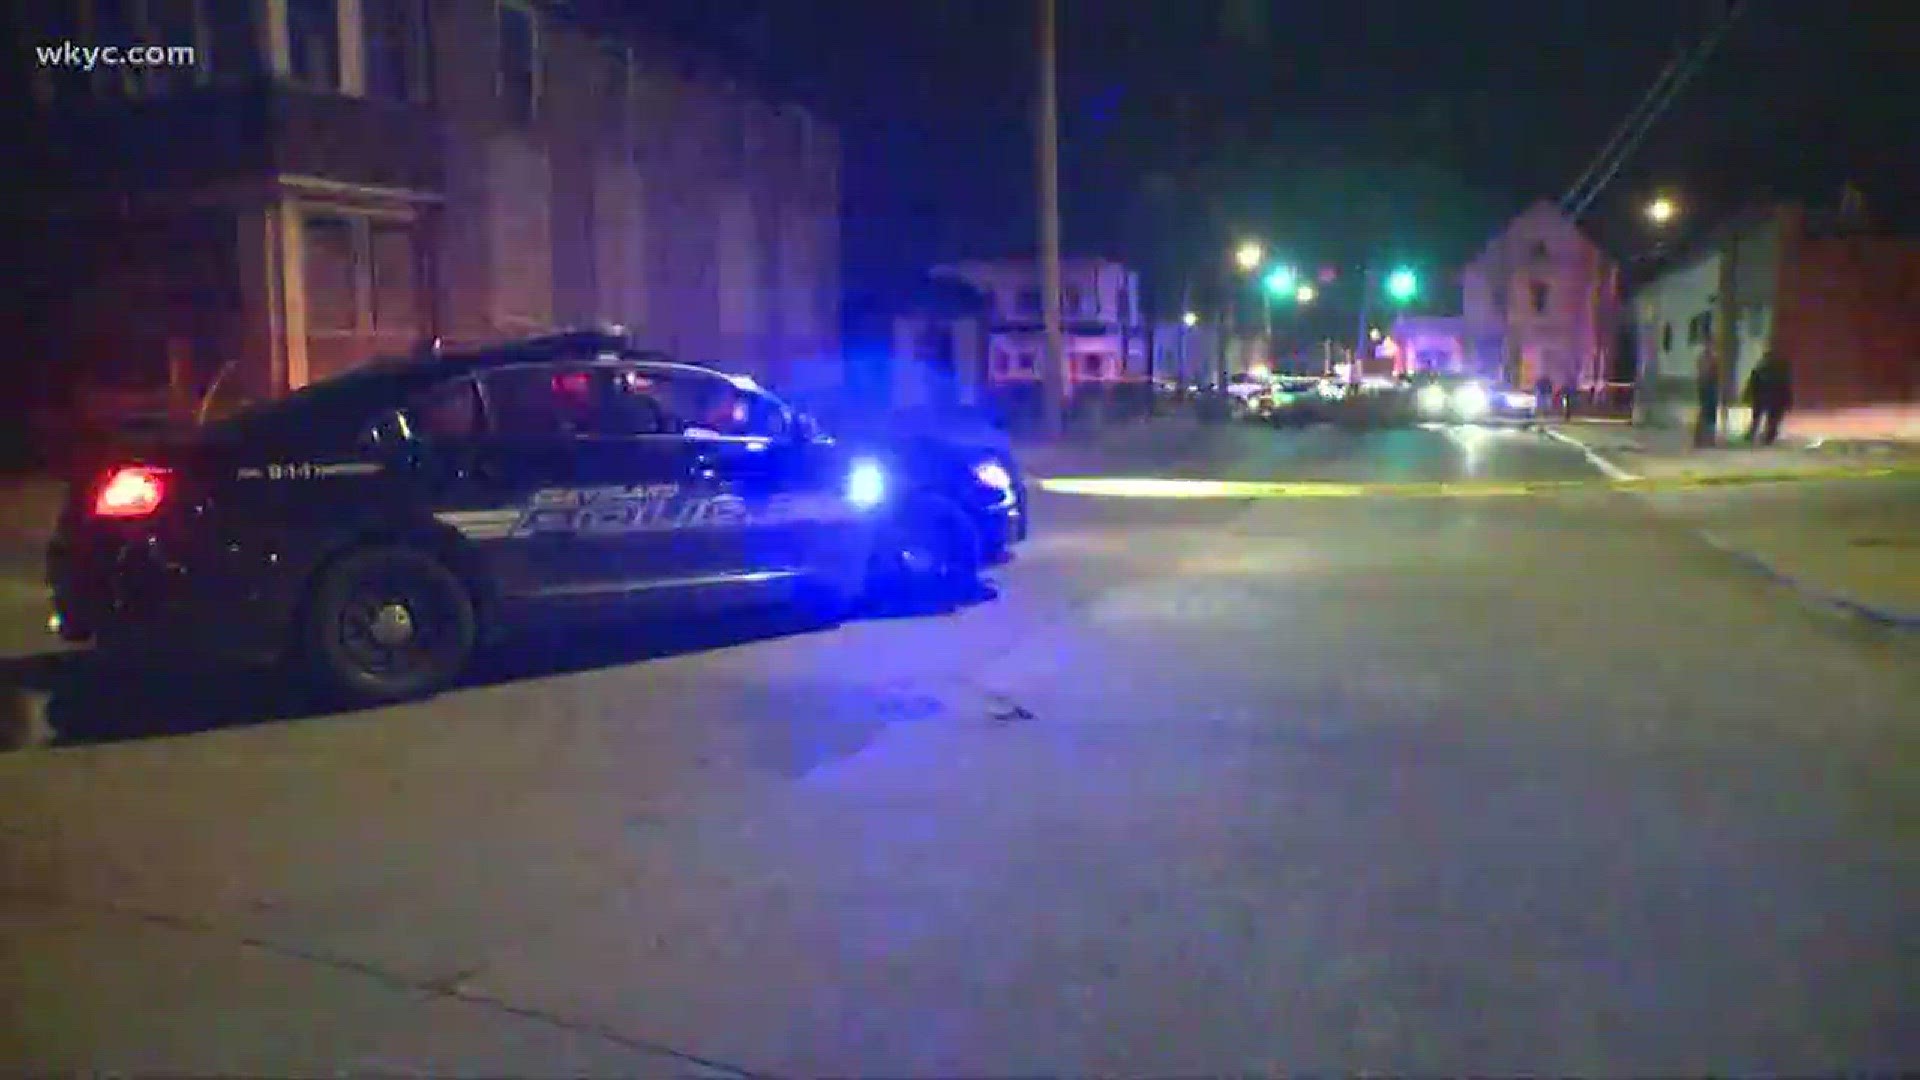 Suspected drug dealer crashes in Cleveland following police chase